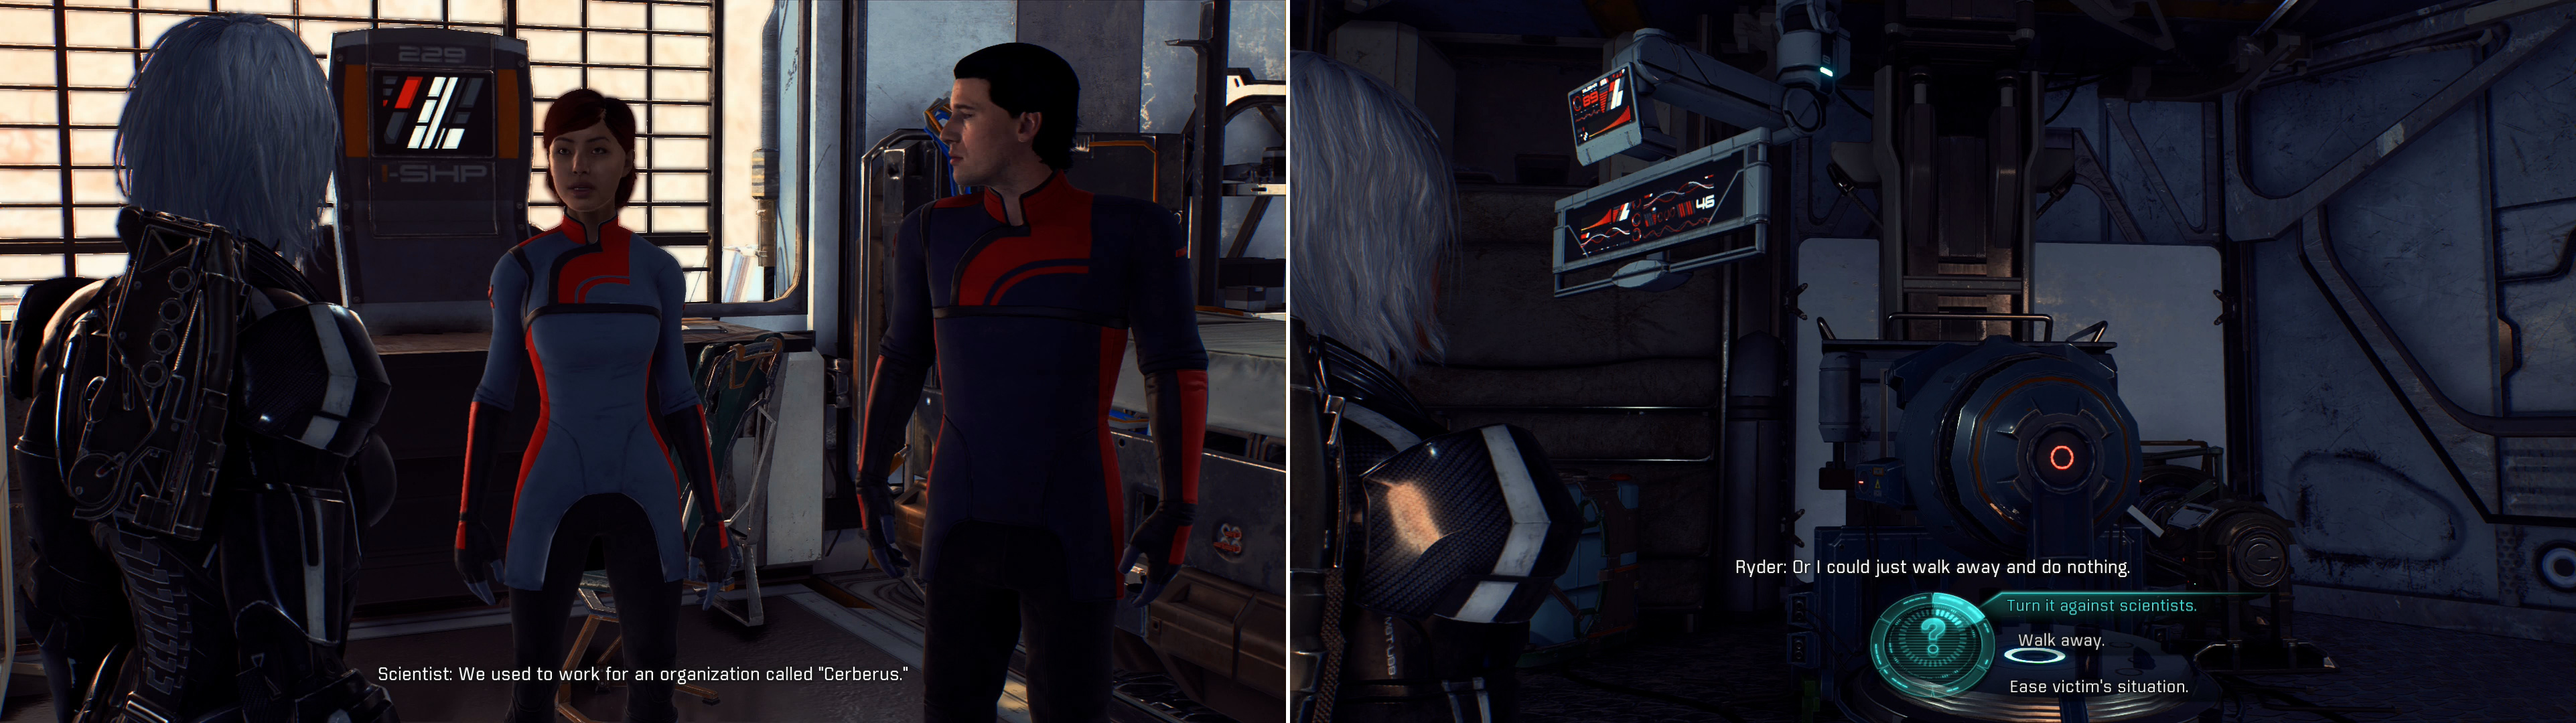 Confront the scientists in the nearby structure (left) then decide what to do with their mind control device (right).